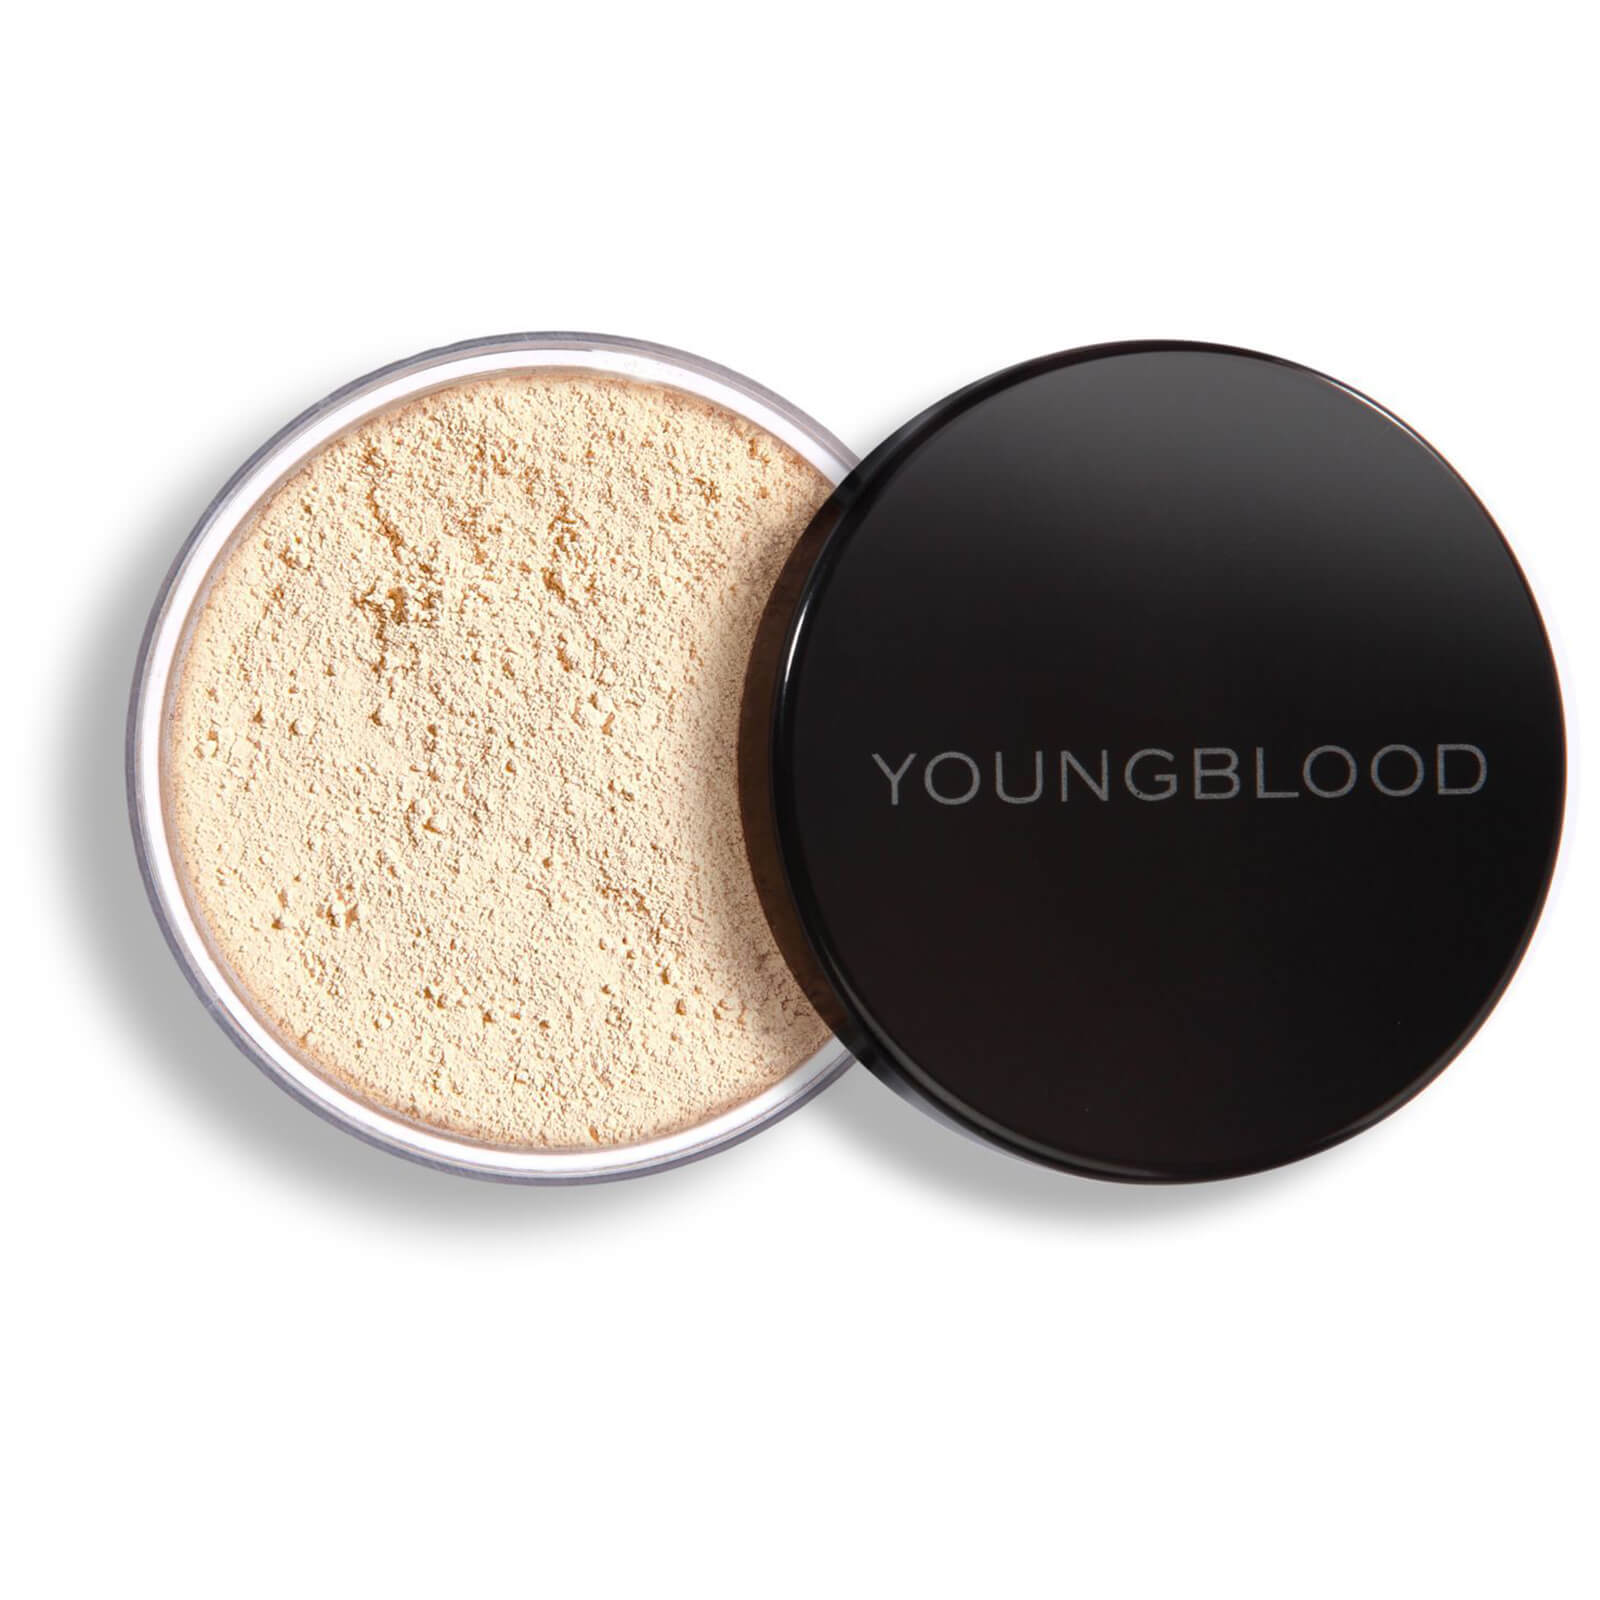 Youngblood Mineral Cosmetics Youngblood Natural Mineral Loose Foundation 10g (Various Shades) - Pearl